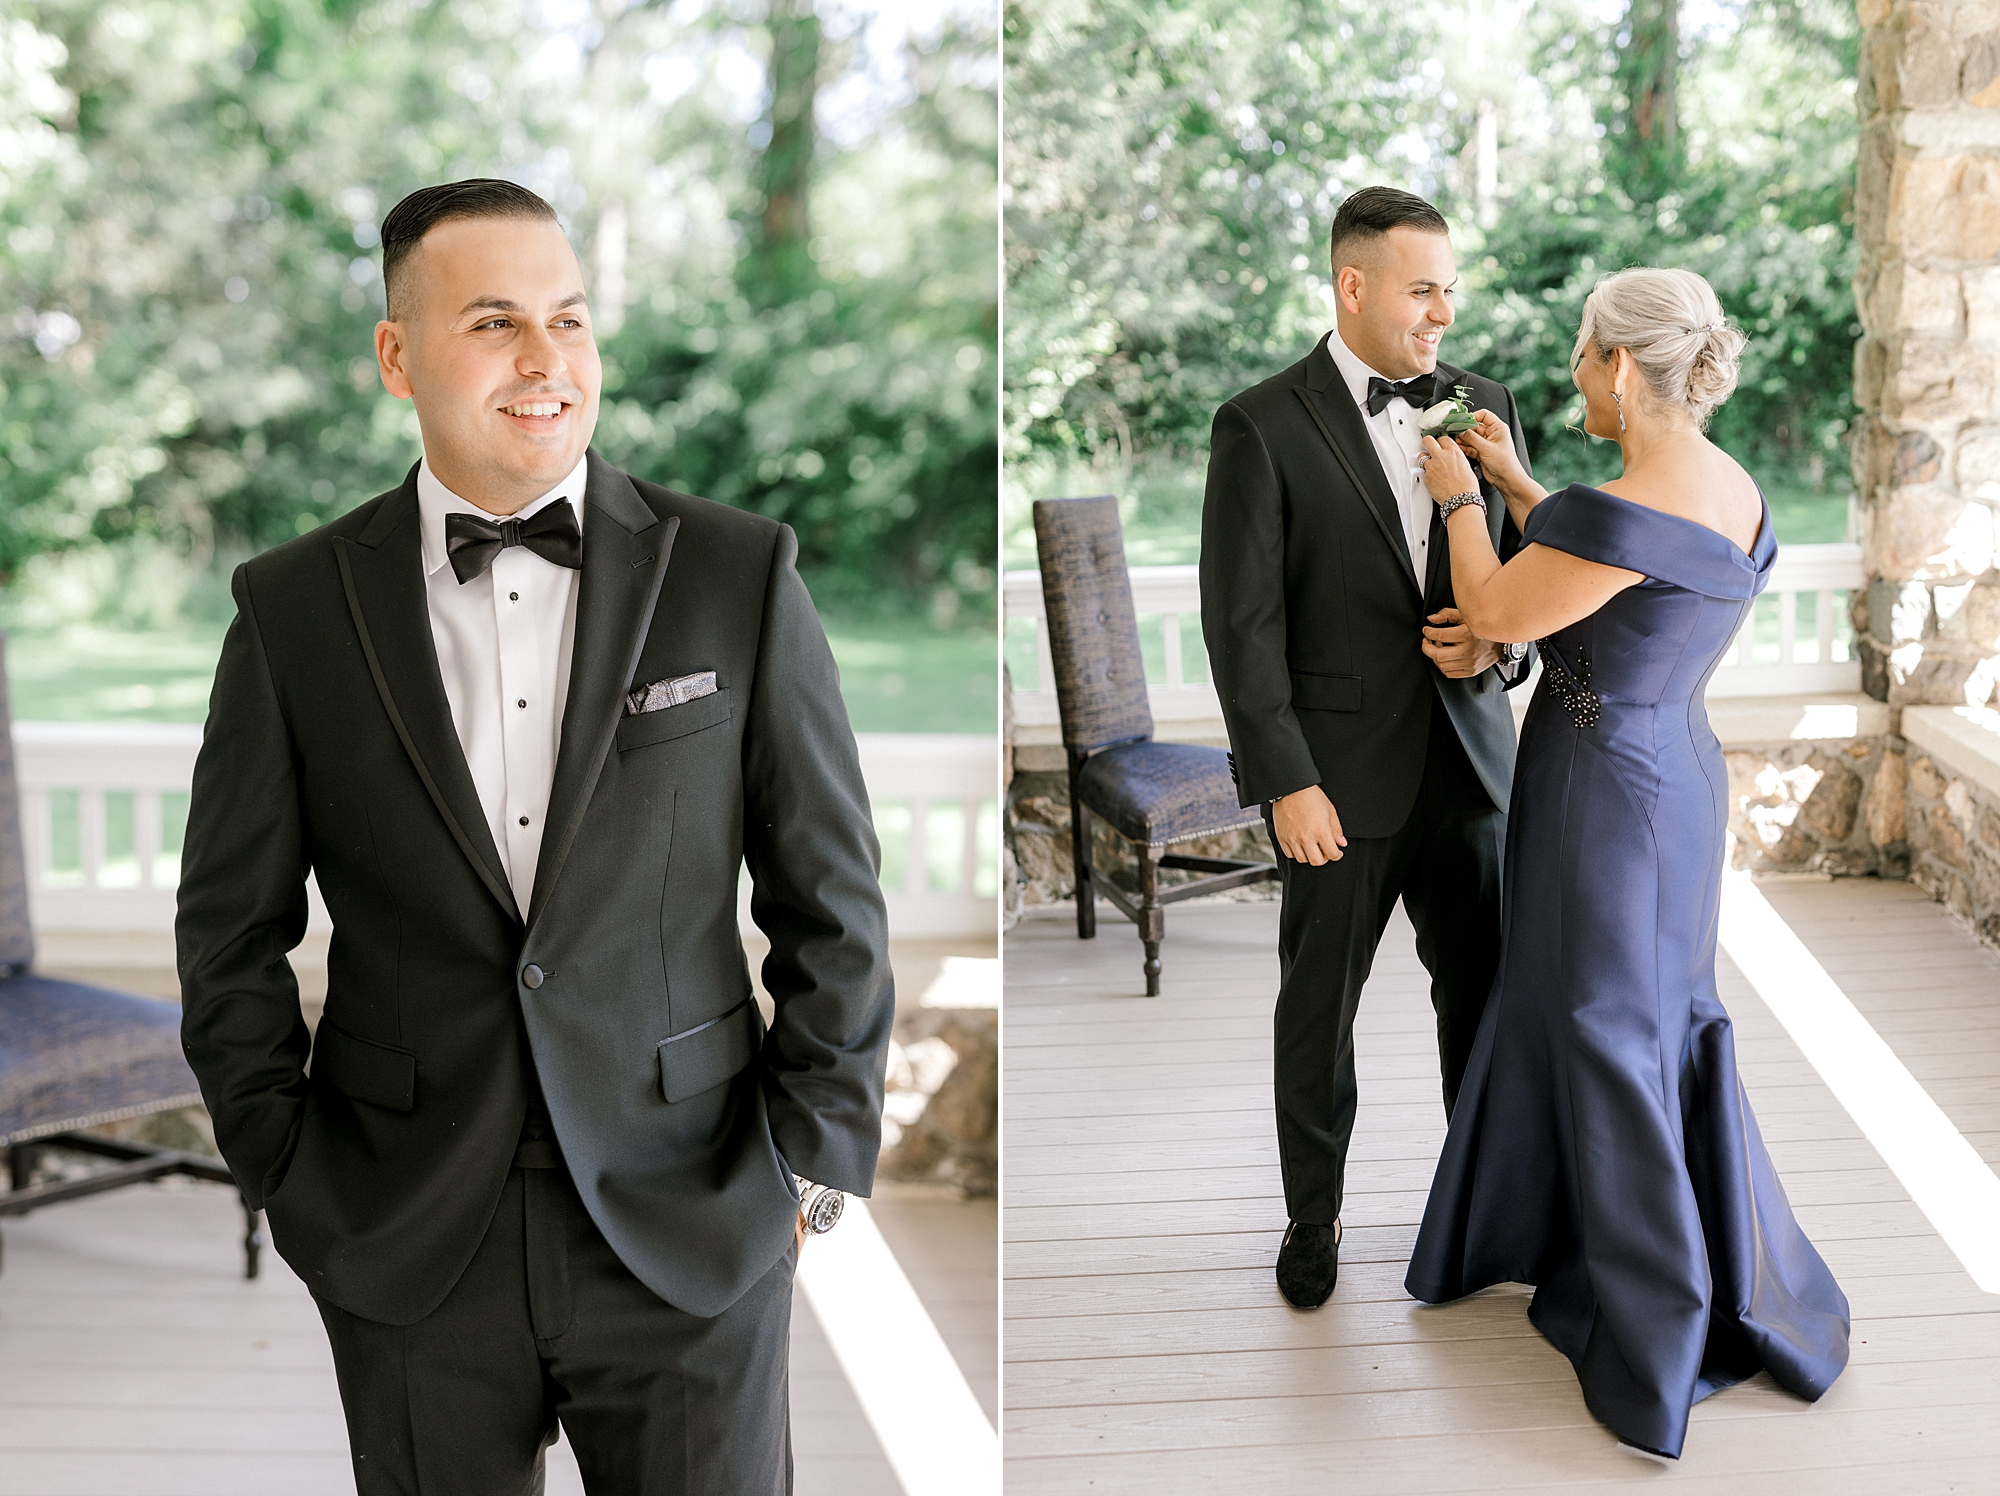 mother in blue dress helps groom with boutonnière